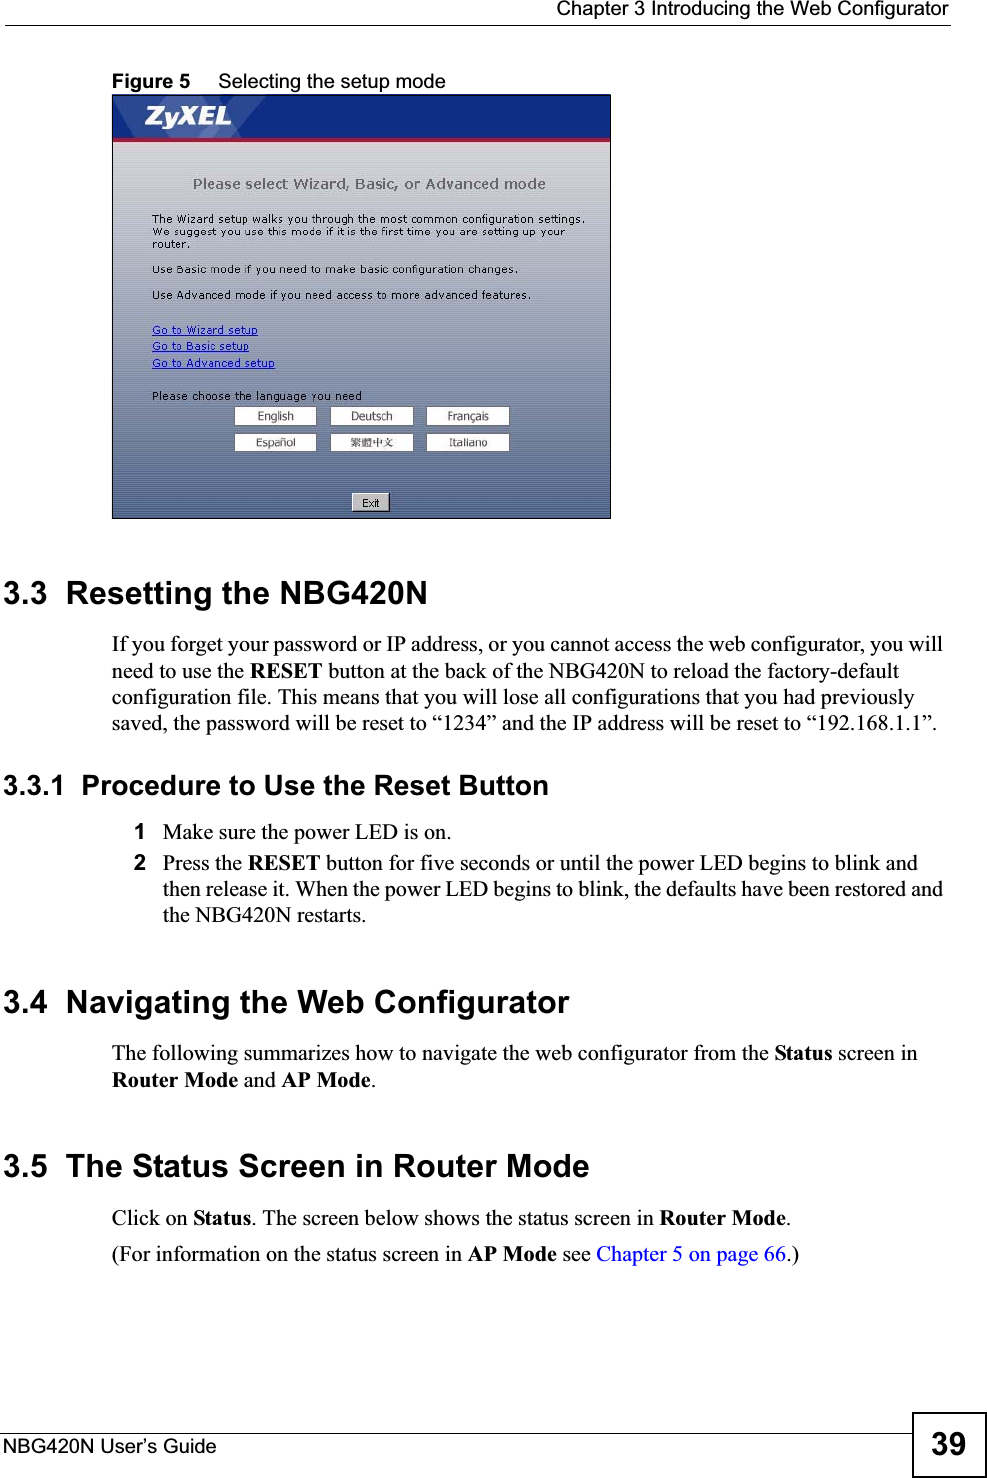  Chapter 3 Introducing the Web ConfiguratorNBG420N User’s Guide 39Figure 5     Selecting the setup mode3.3  Resetting the NBG420NIf you forget your password or IP address, or you cannot access the web configurator, you will need to use the RESET button at the back of the NBG420N to reload the factory-default configuration file. This means that you will lose all configurations that you had previously saved, the password will be reset to “1234” and the IP address will be reset to “192.168.1.1”.3.3.1  Procedure to Use the Reset Button1Make sure the power LED is on.2Press the RESET button for five seconds or until the power LED begins to blink and then release it. When the power LED begins to blink, the defaults have been restored and the NBG420N restarts.3.4  Navigating the Web Configurator    The following summarizes how to navigate the web configurator from the Status screen in Router Mode and AP Mode.3.5  The Status Screen in Router ModeClick on Status. The screen below shows the status screen in Router Mode.(For information on the status screen in AP Mode see Chapter 5 on page 66.)